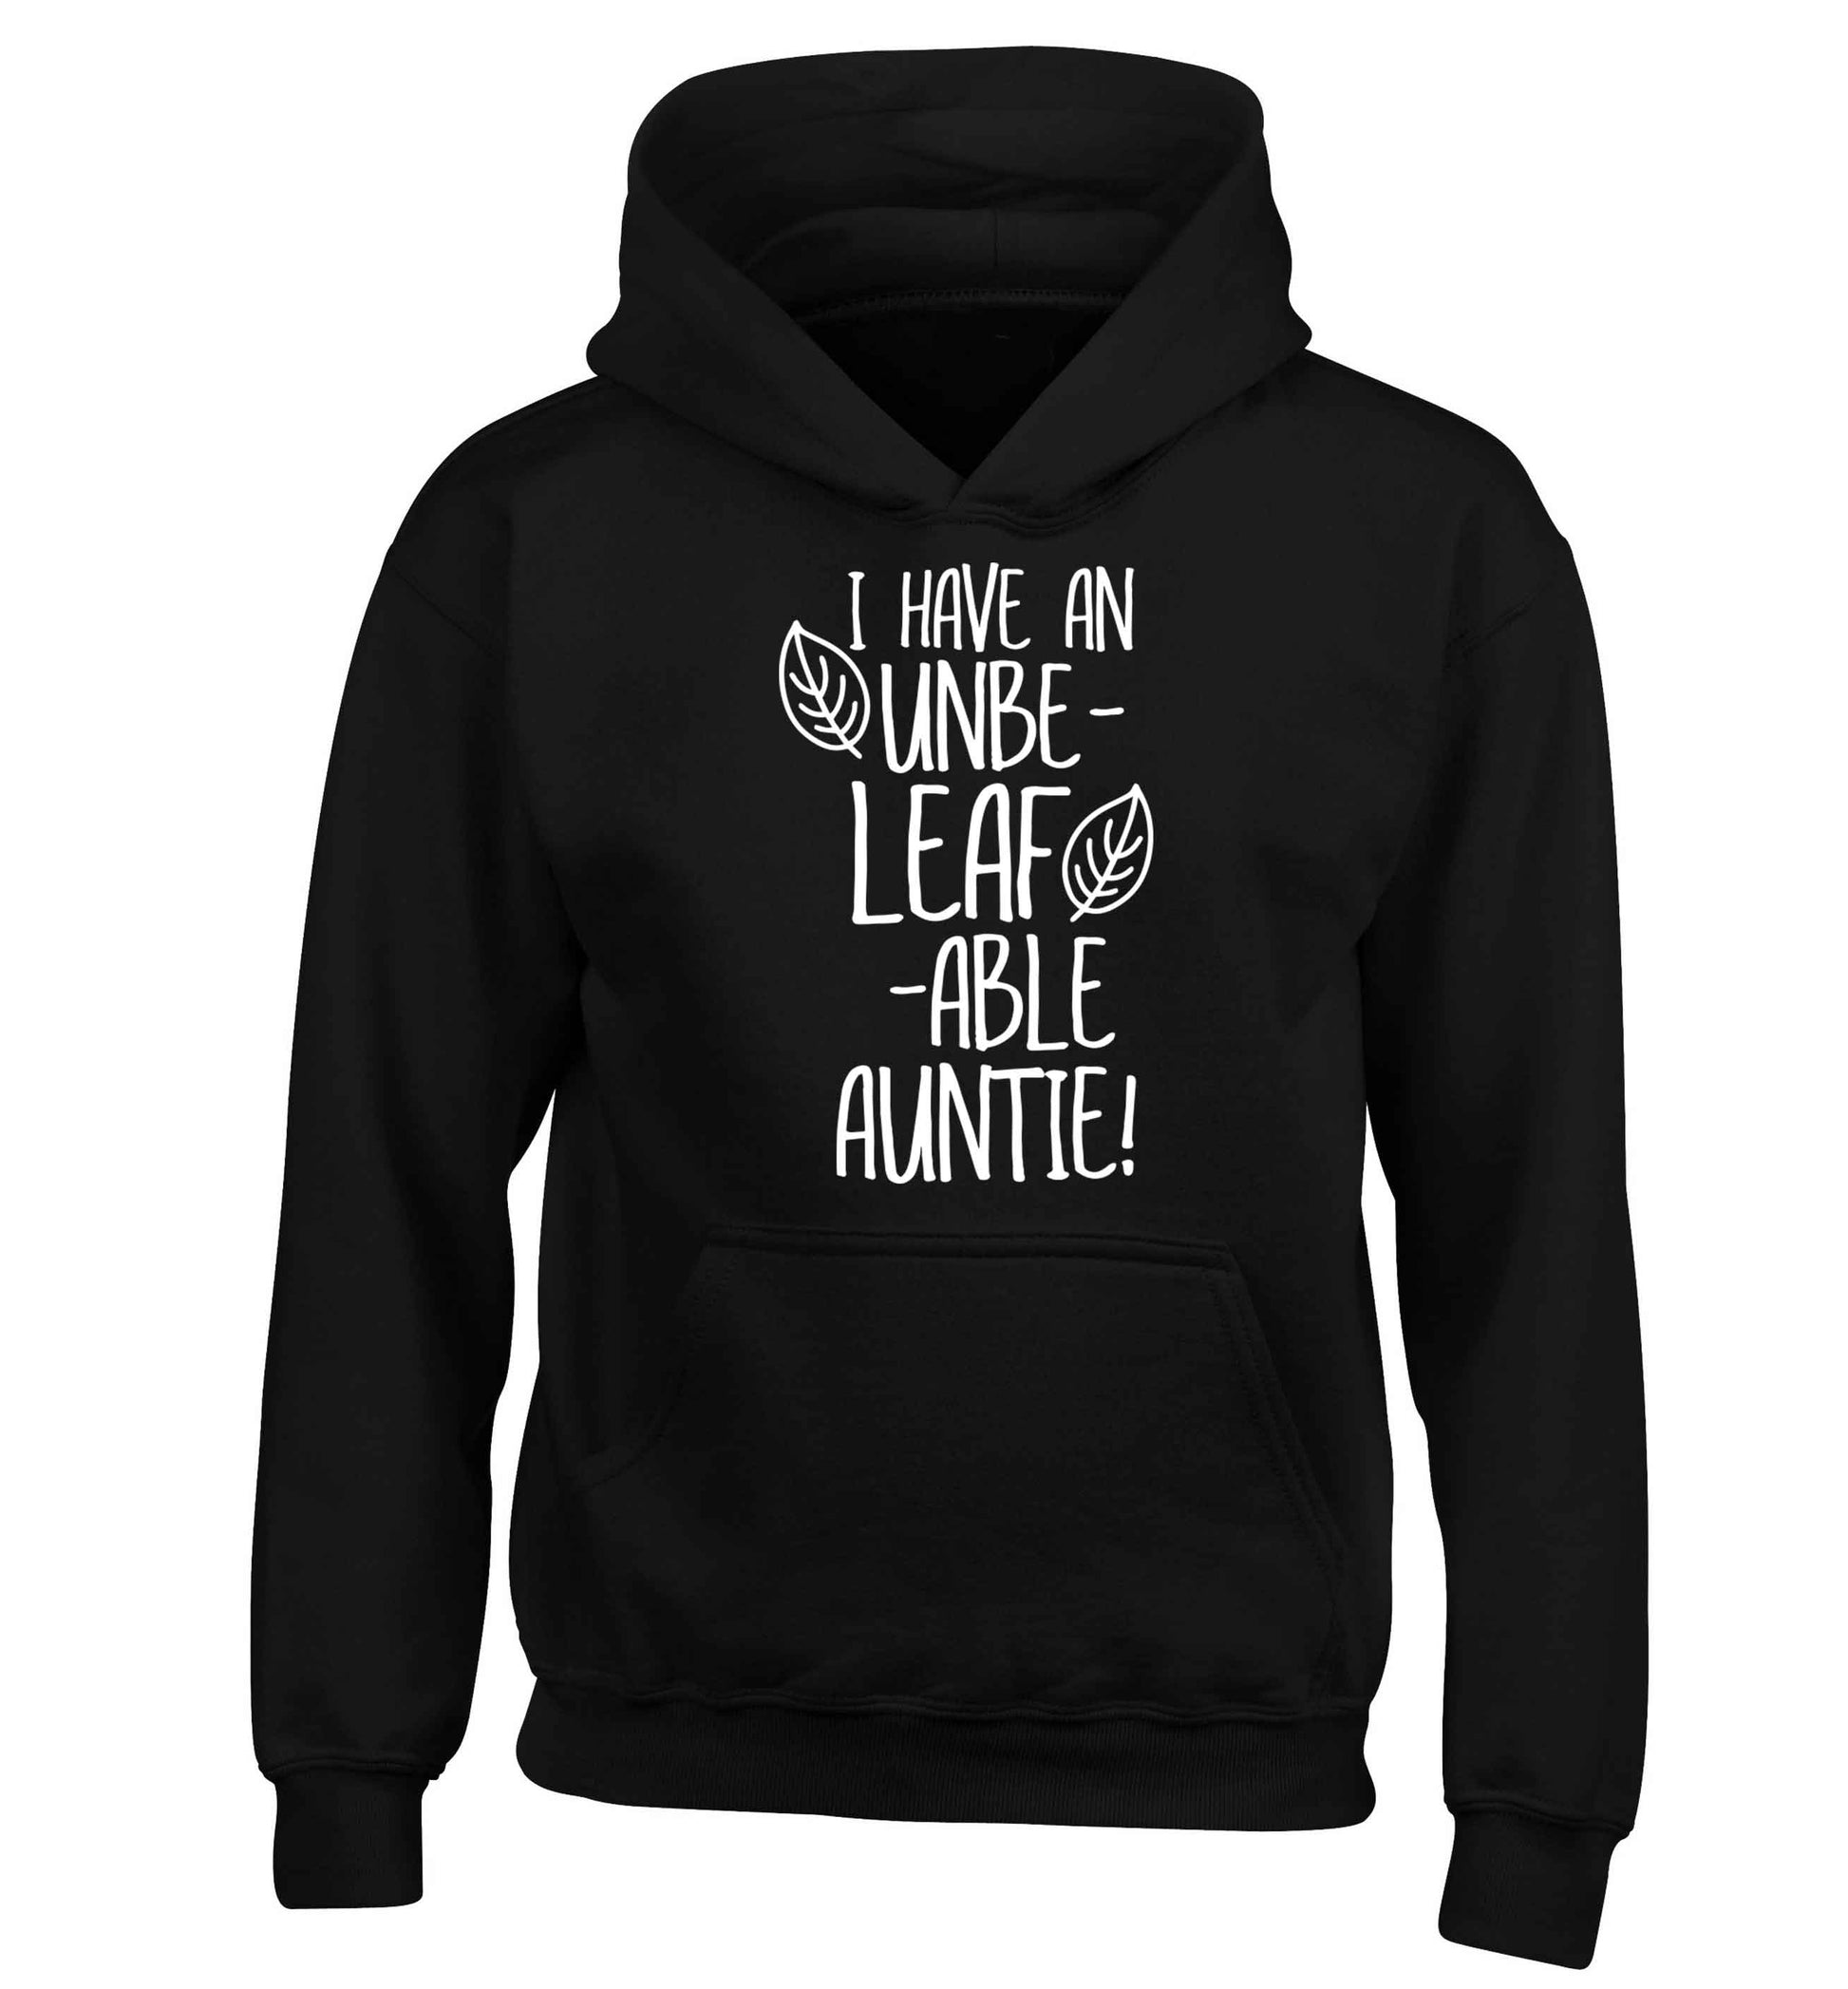 I have an unbe-leaf-able auntie children's black hoodie 12-13 Years